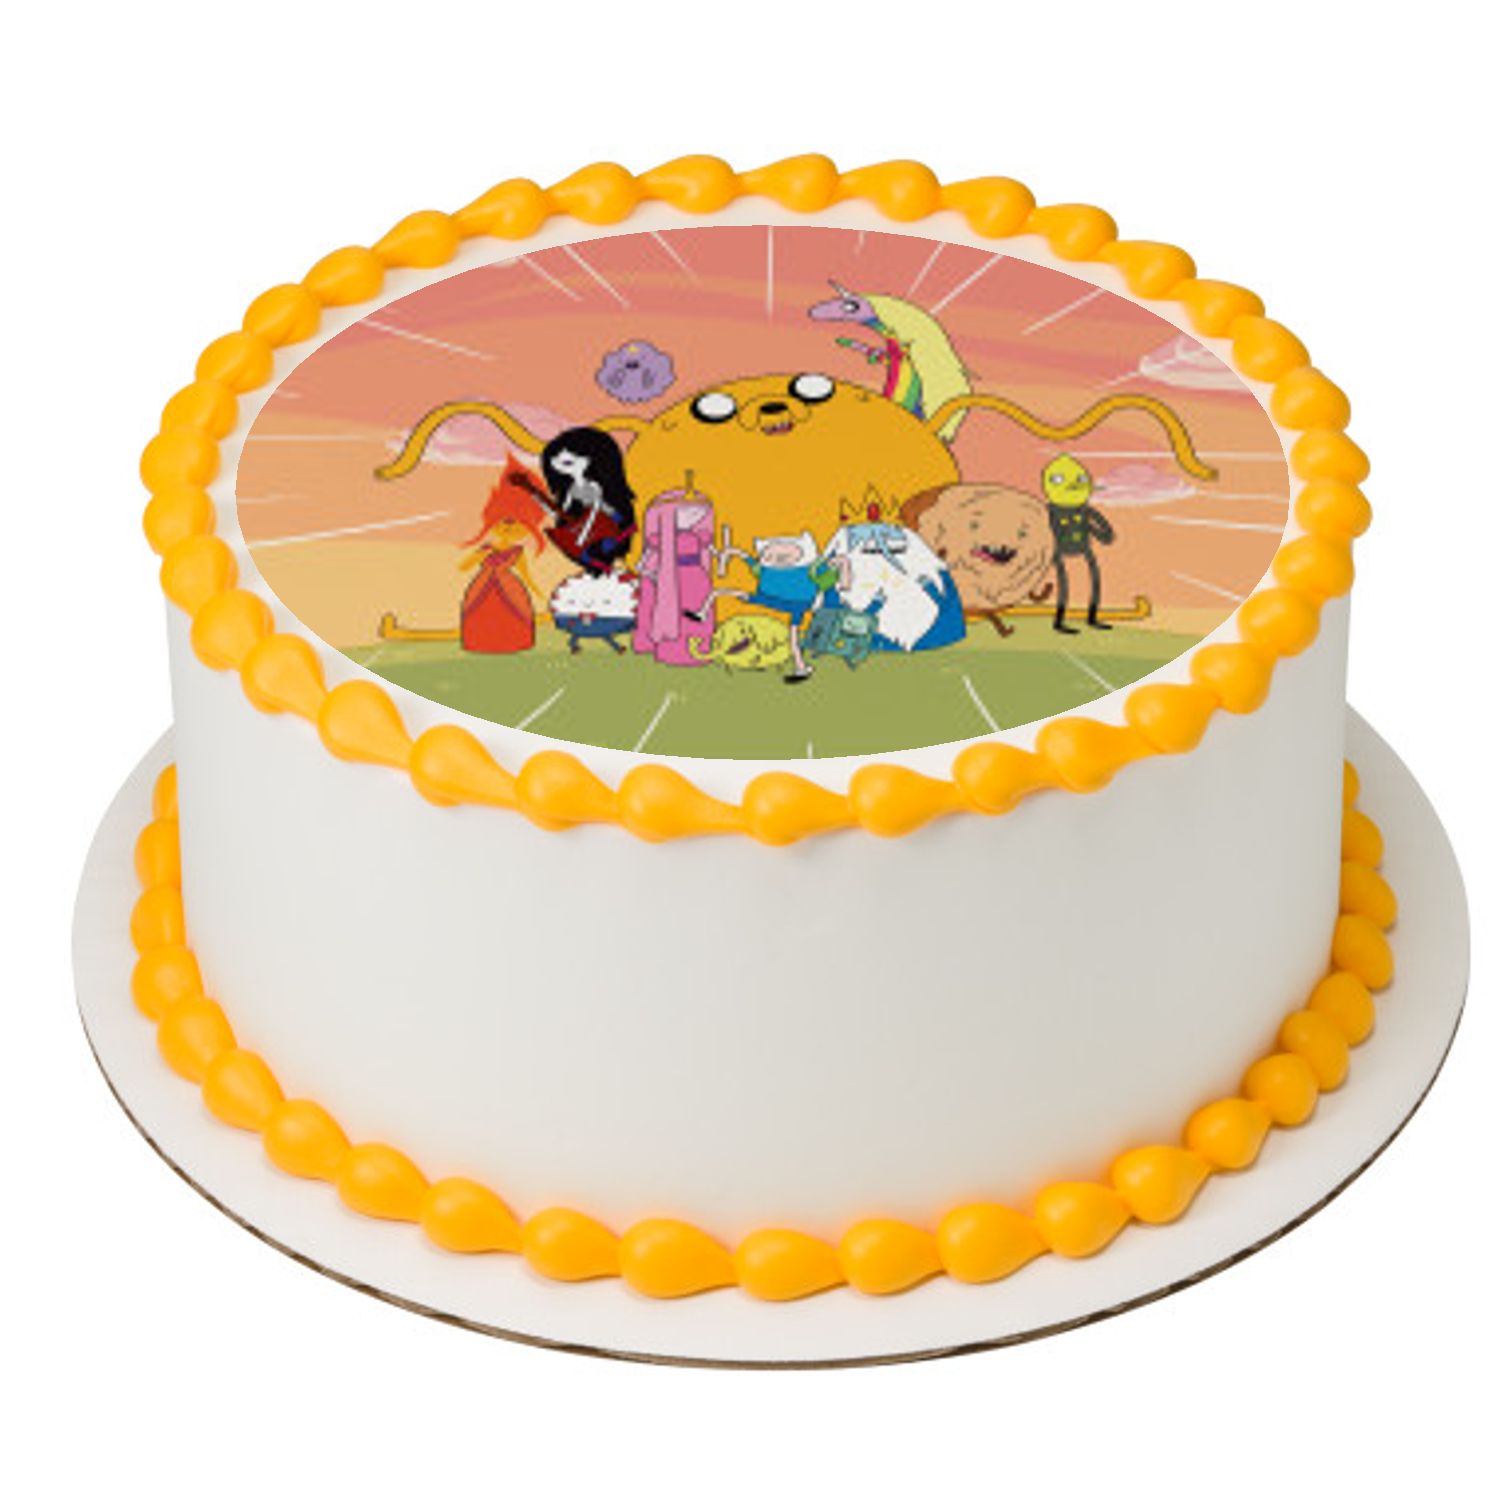 30x Adventure Time Edible Icing Cupcake Toppers 35mm Cake Decorating Images 